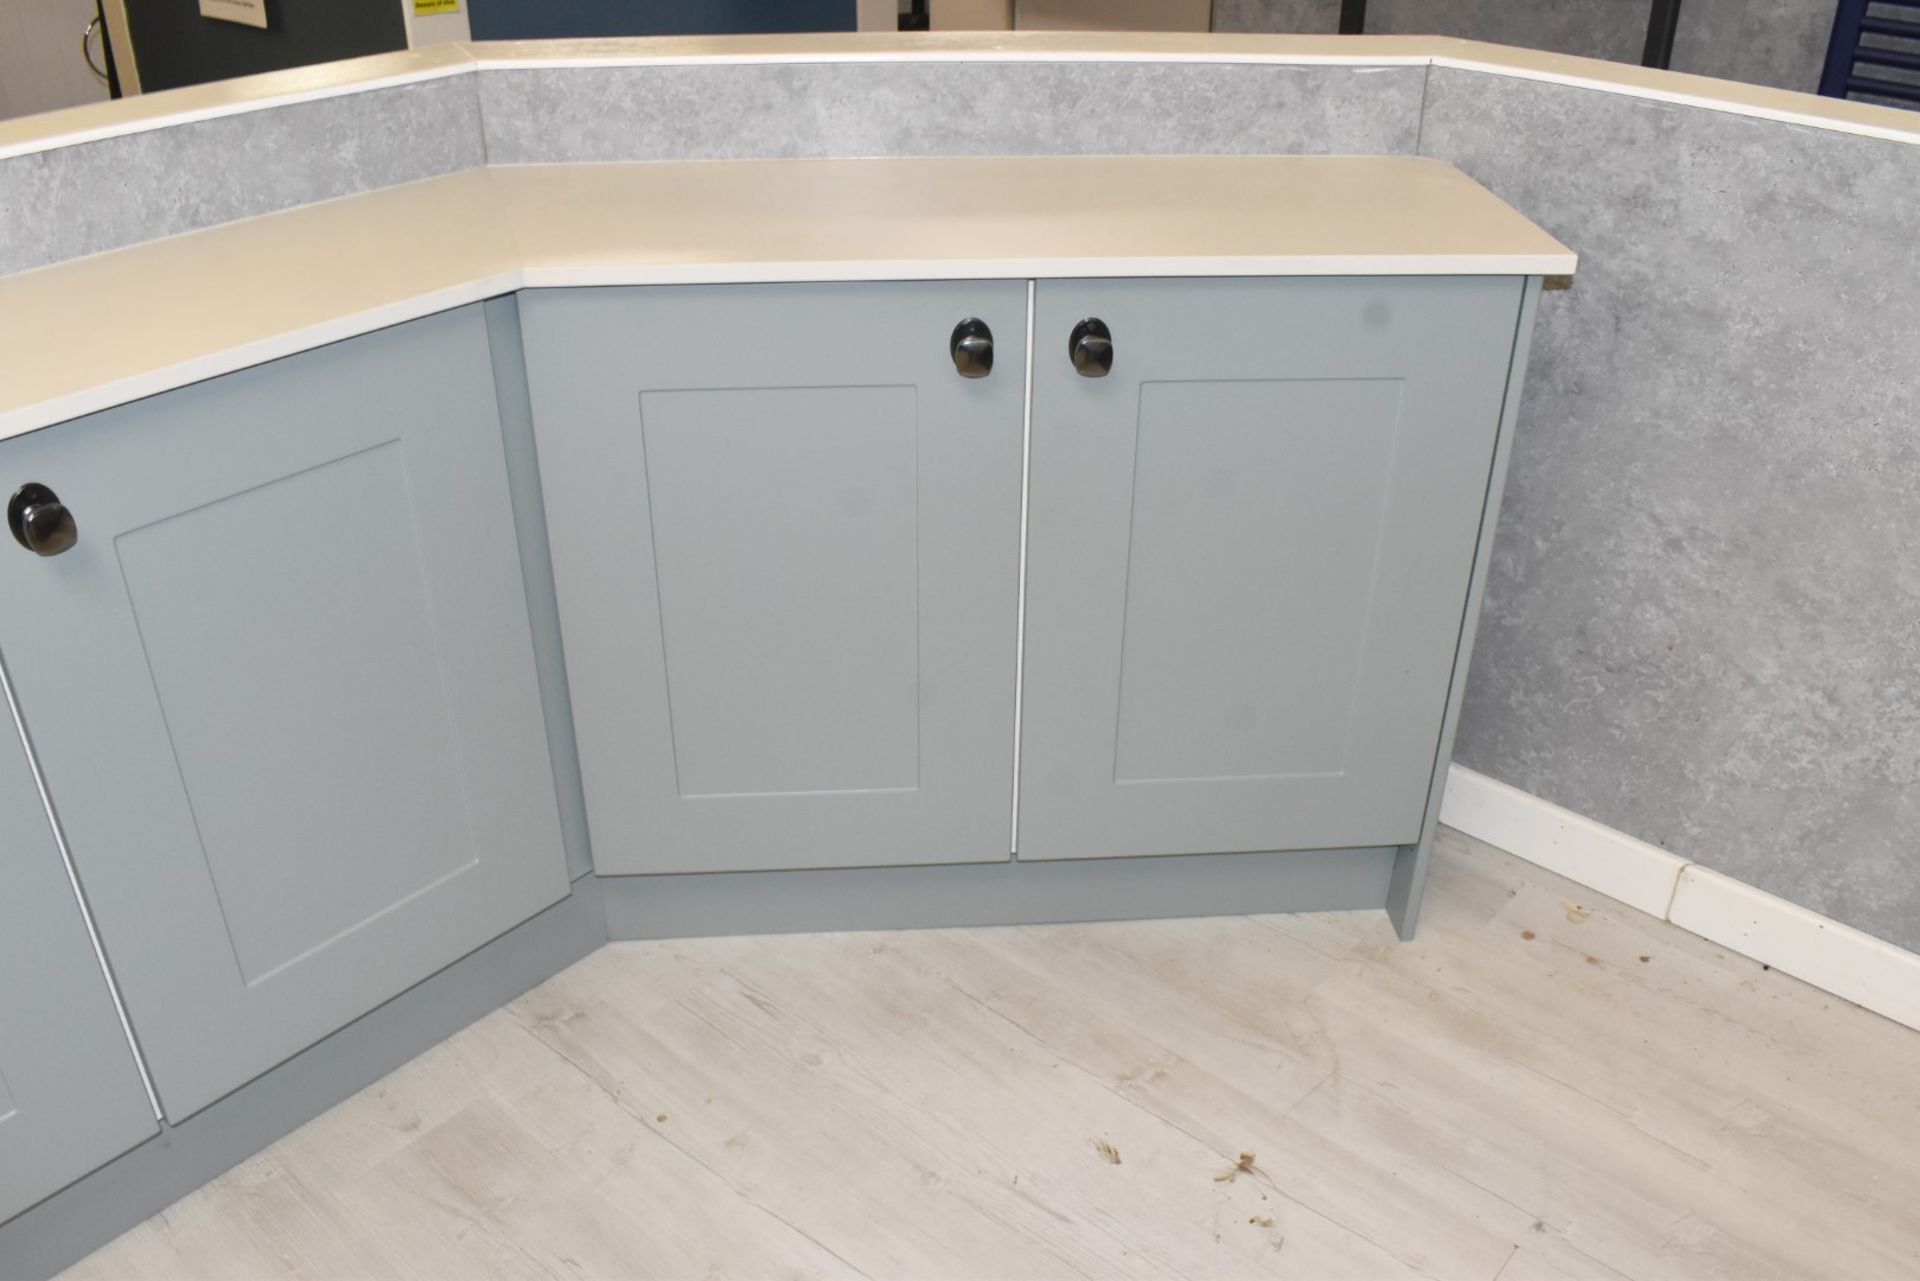 1 x Four Door Cabinet With a Light Grey Finish, Shaker Style Doors and a Silestone Worktop - Image 3 of 10